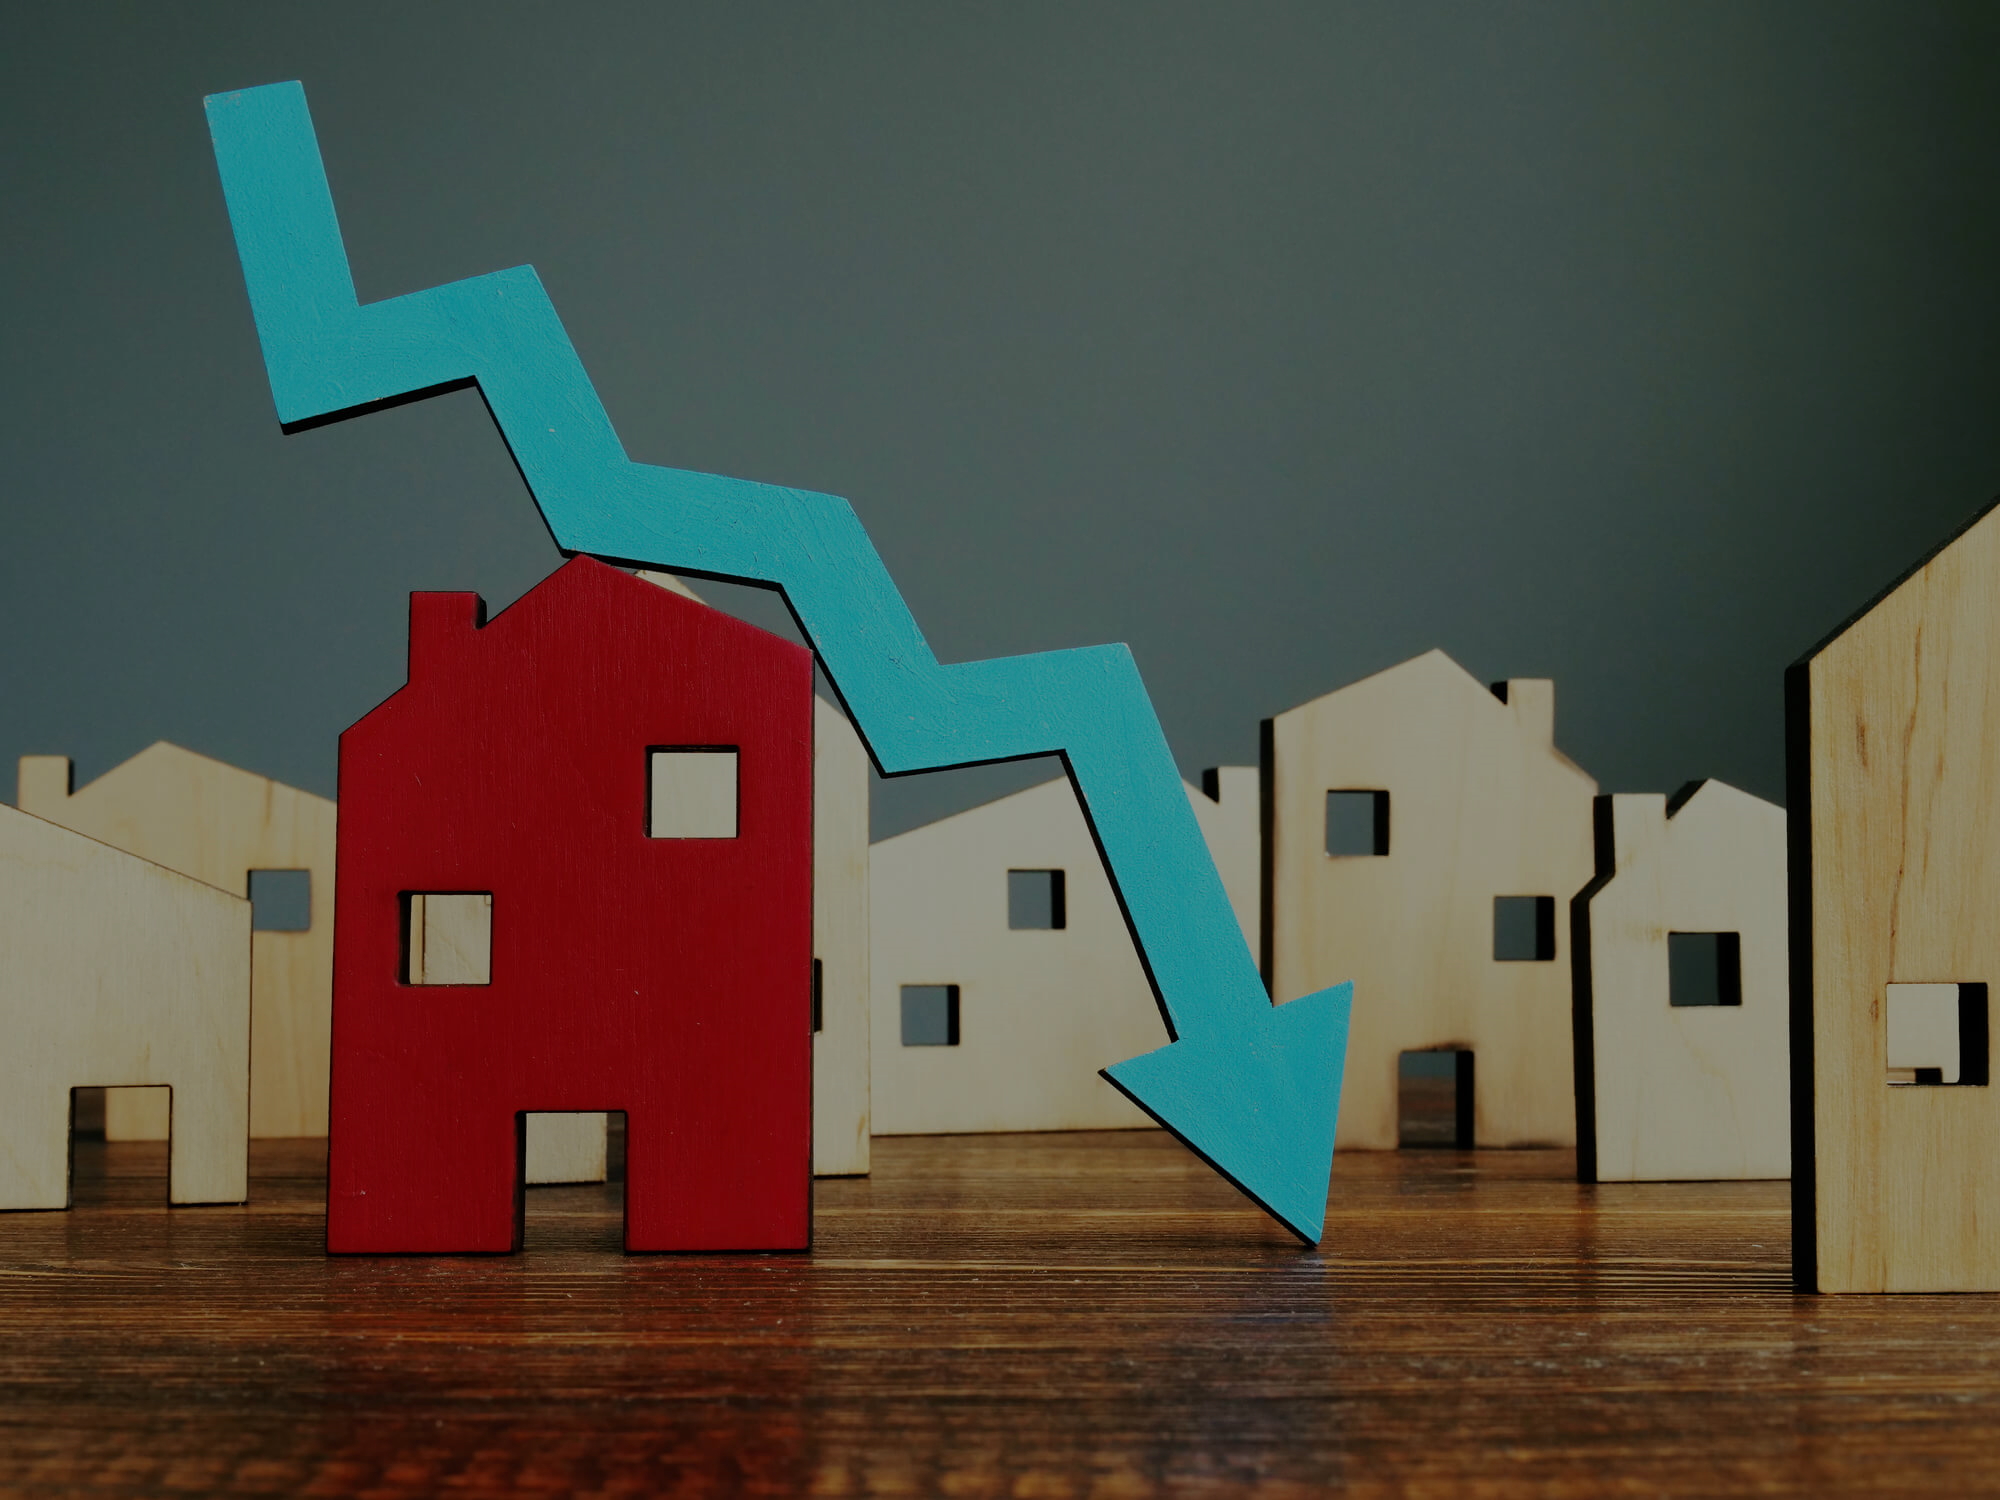 house prices dropping | cherish property buyer's agents